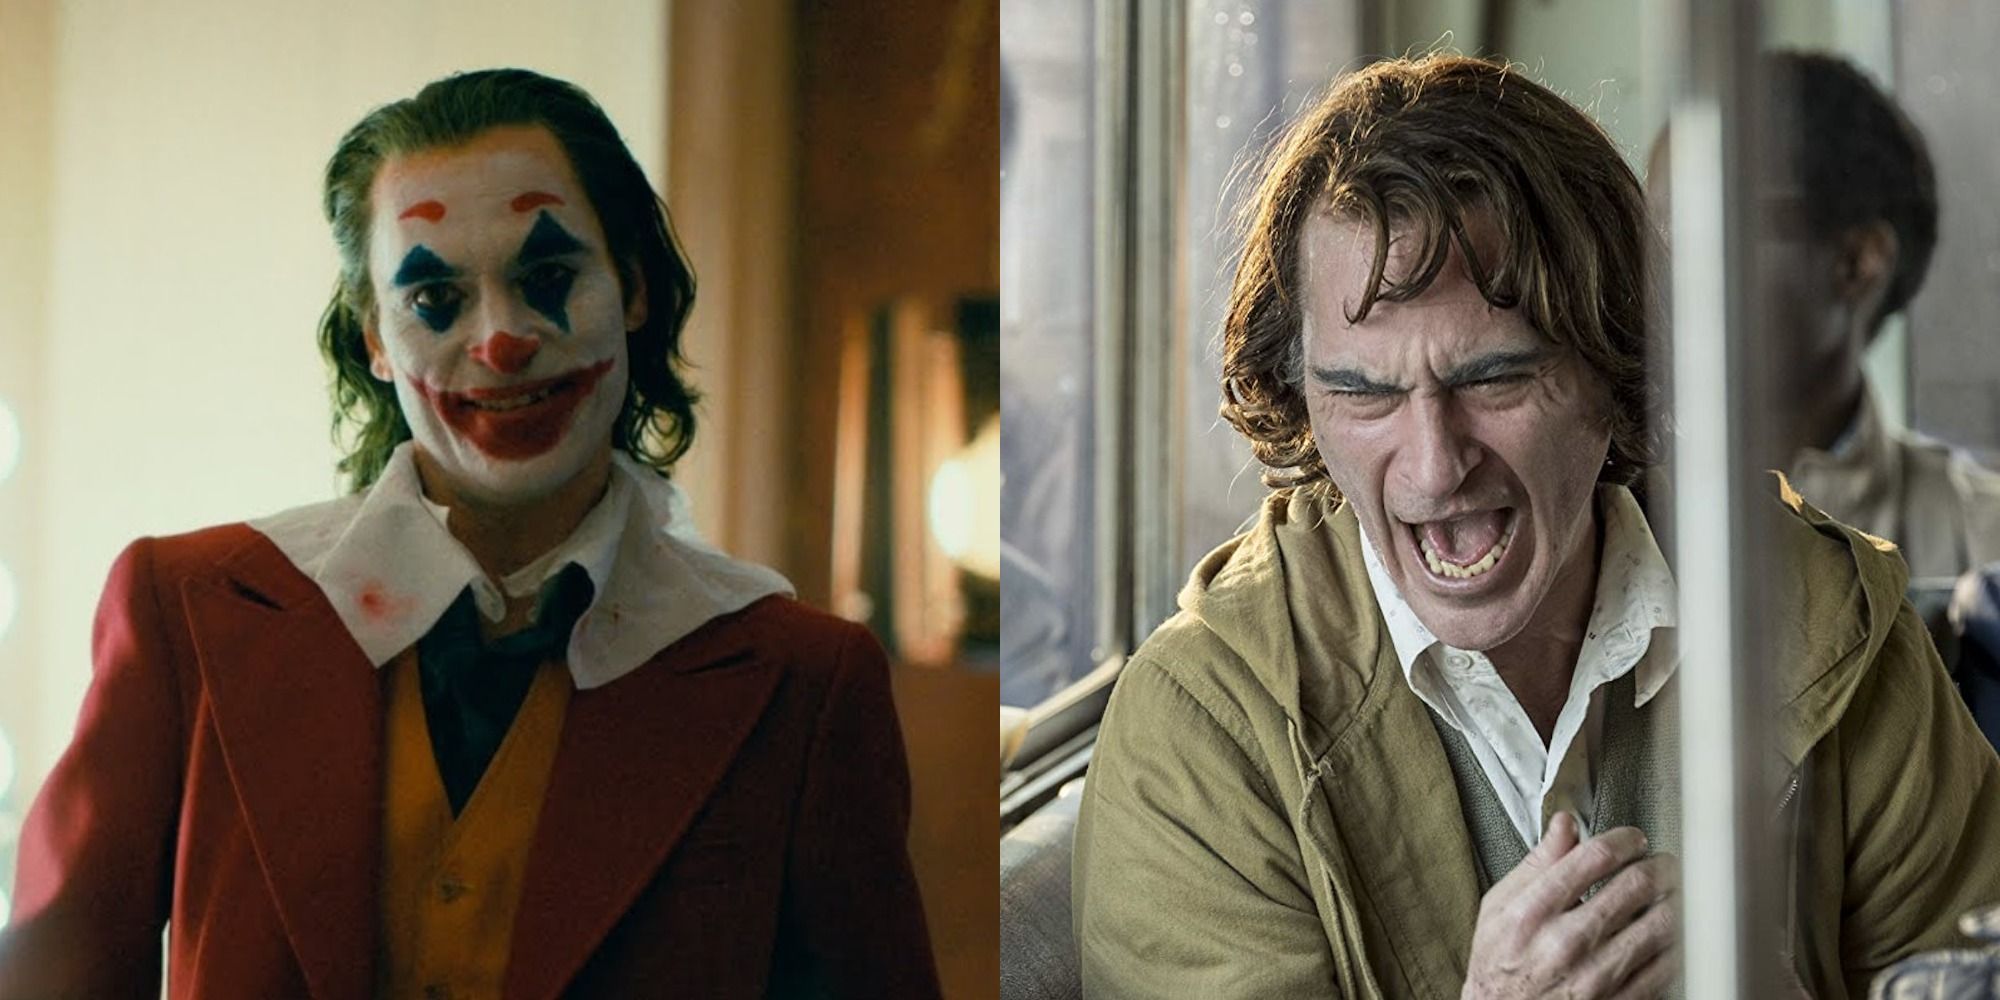 Split image of Arthur Fleck in makeup and laughing on the bus in Joker